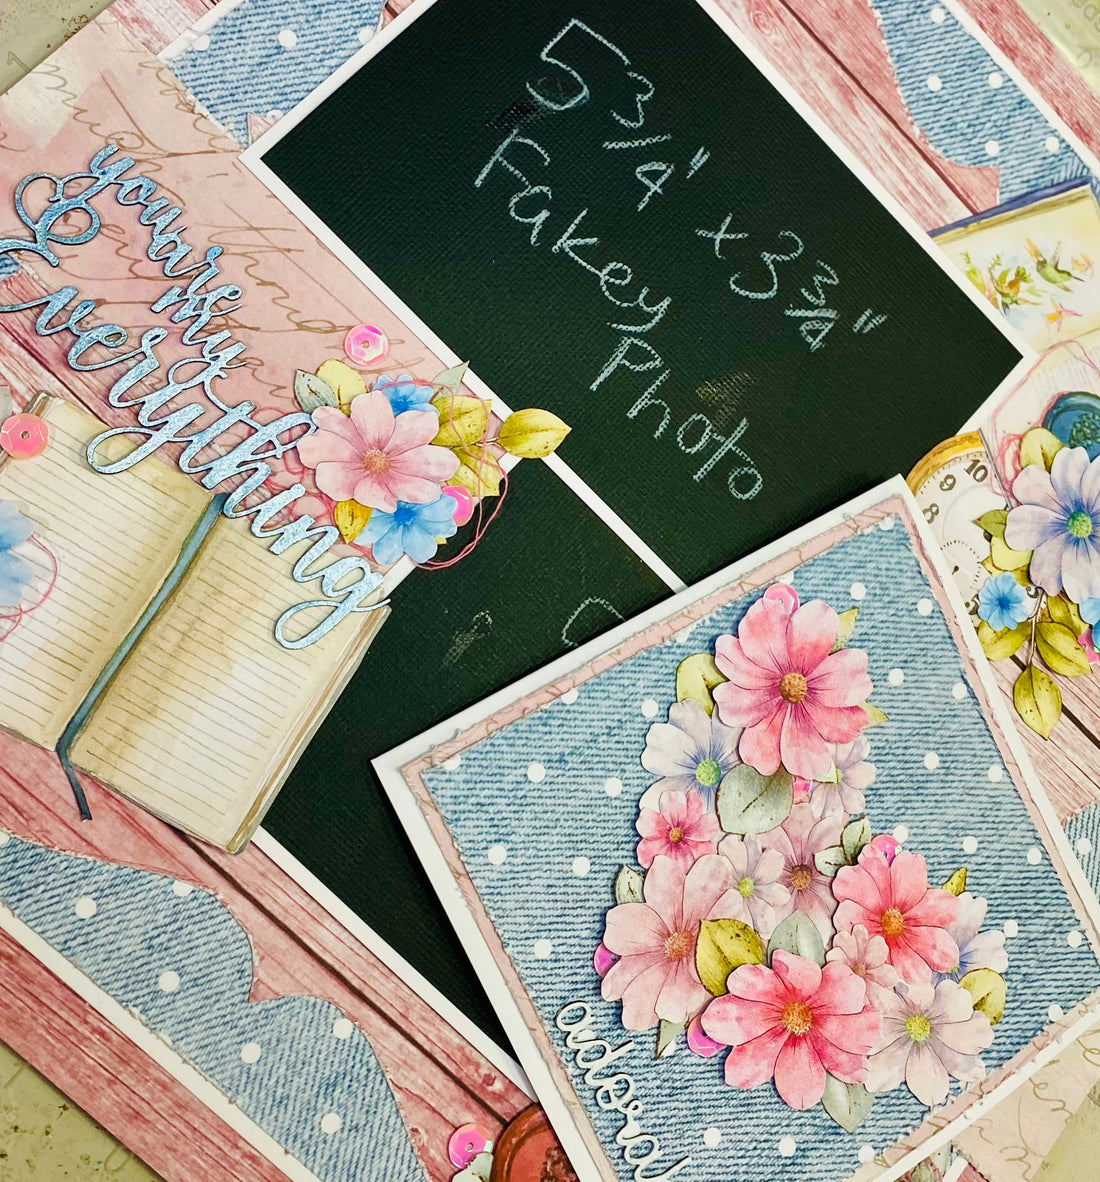 Week 48/2023 - Subscription Cardmaking & Scrapbooking Classes using Magical Memories with the amazing Alicia Redshaw